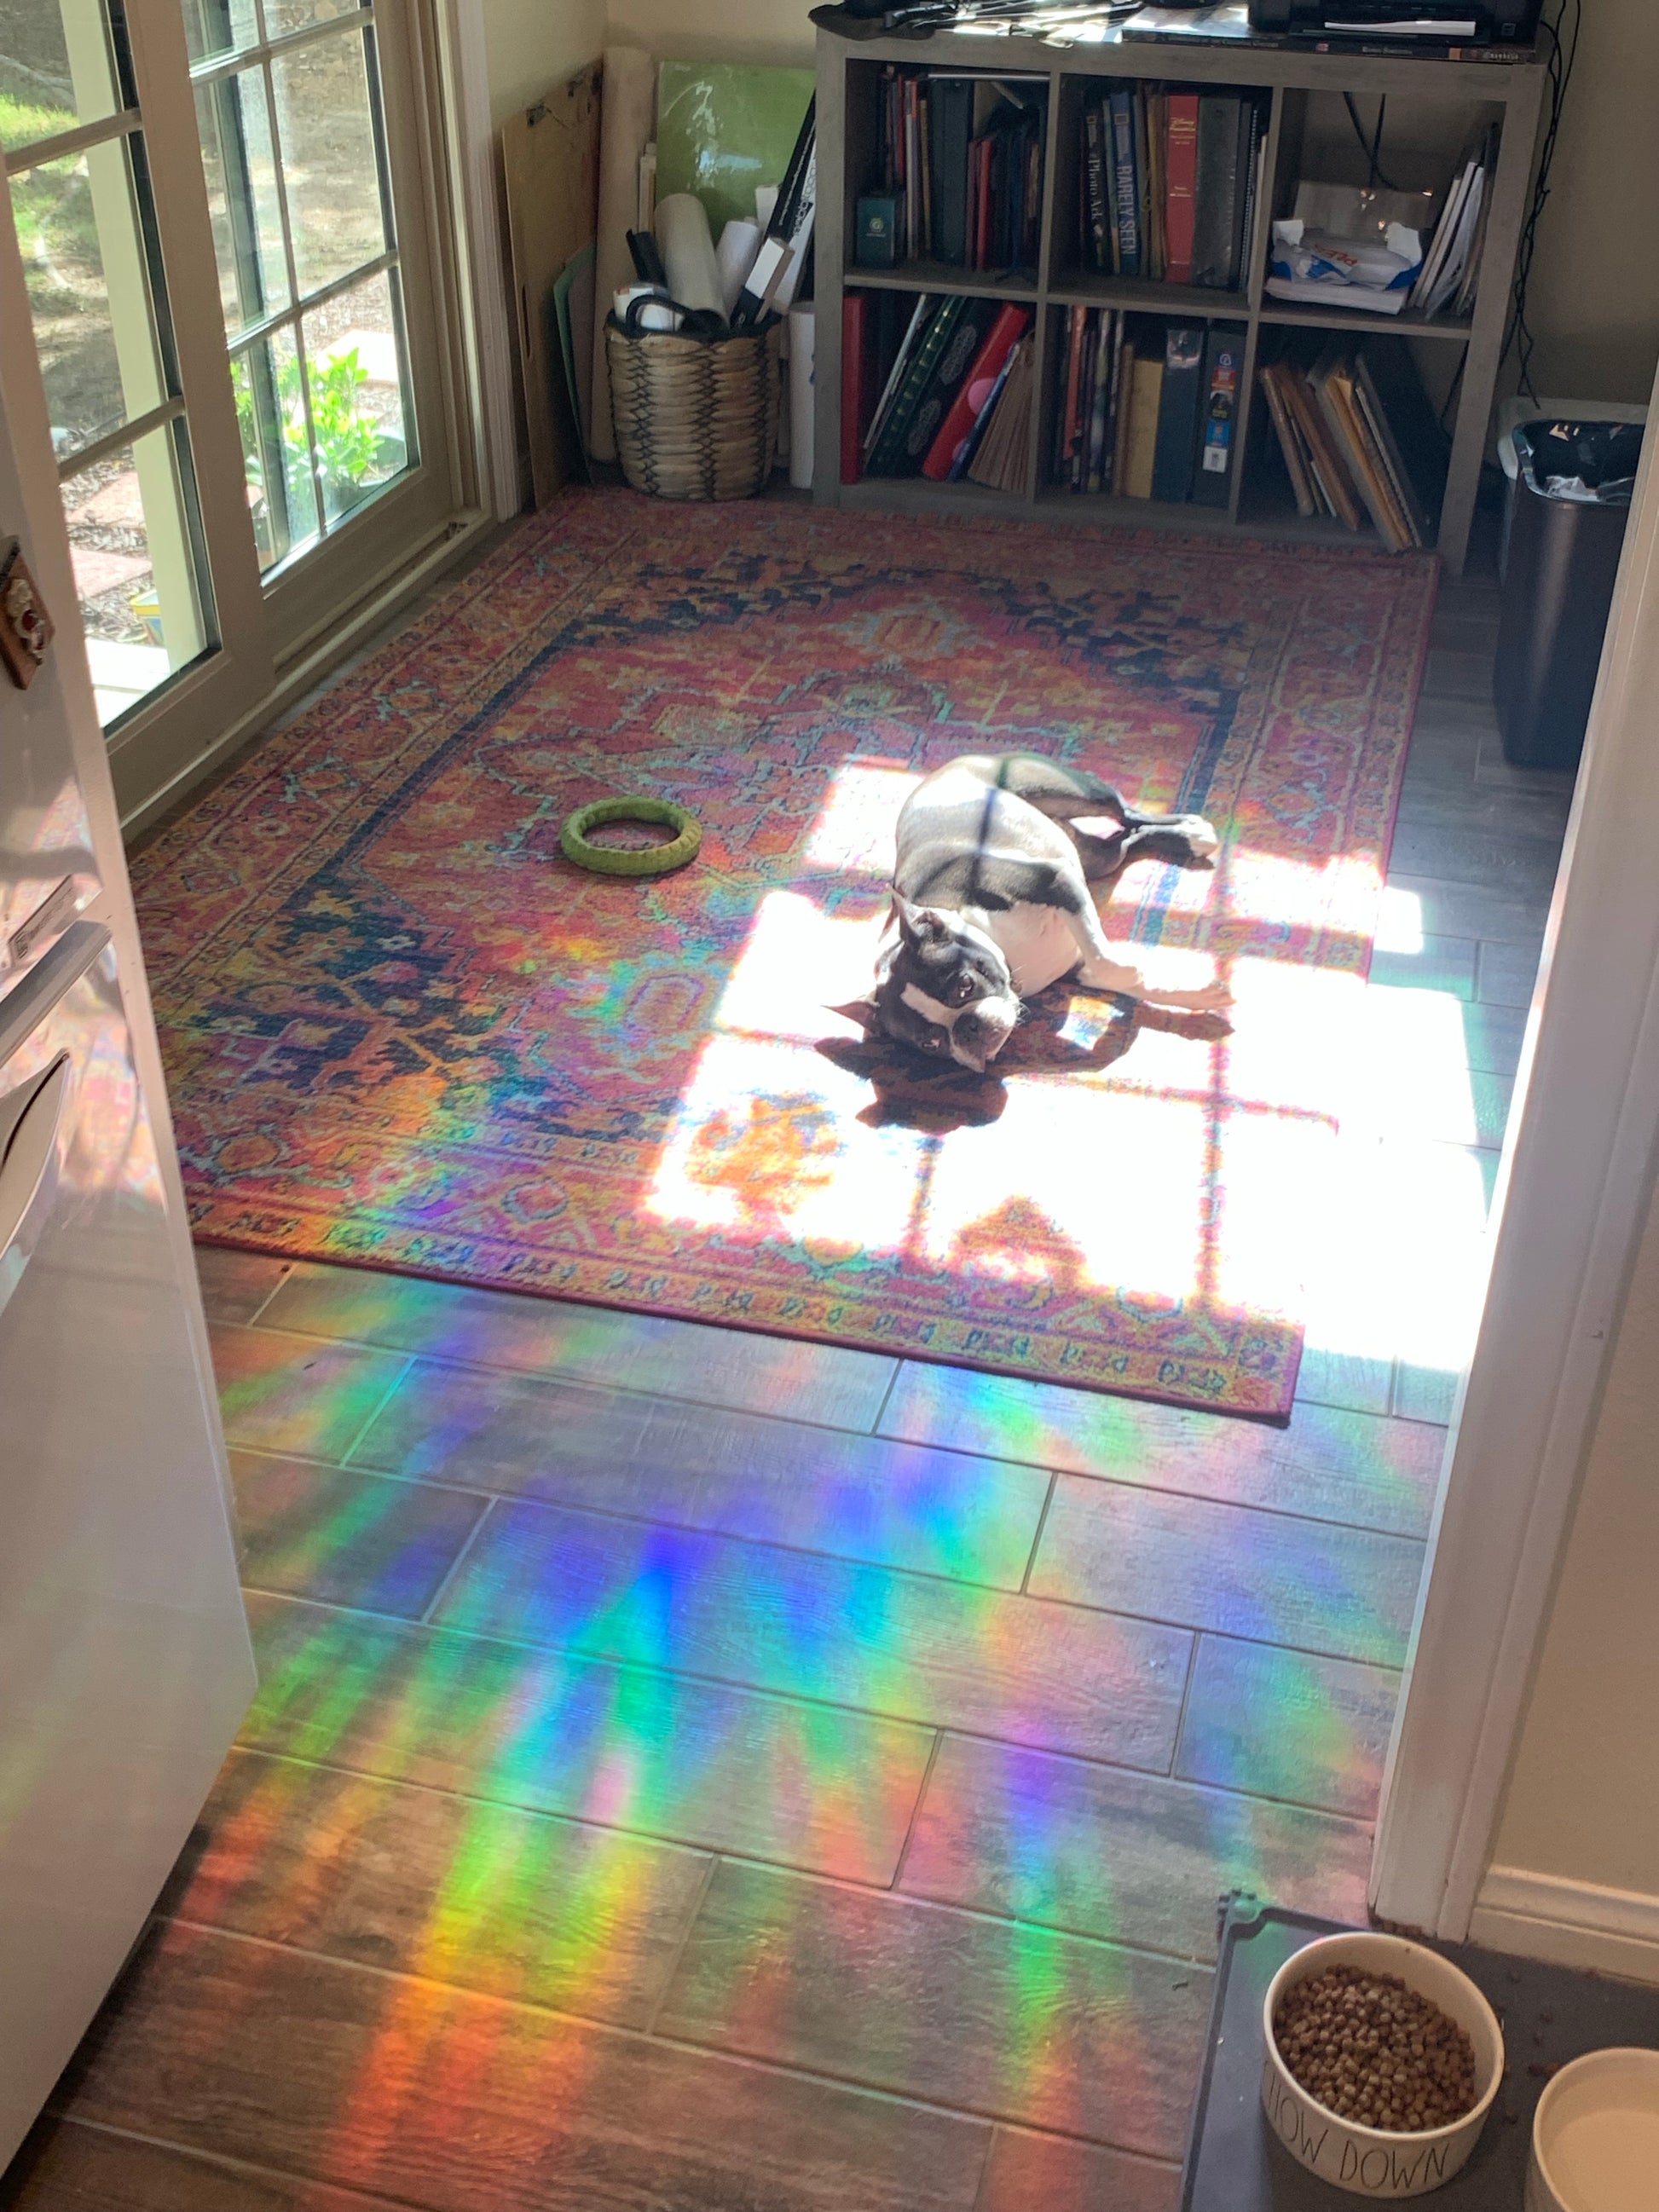 I encourage anyone to join me in the holographic rainbow window cling club  🌈 it livens up every room✨️ : r/maximalism